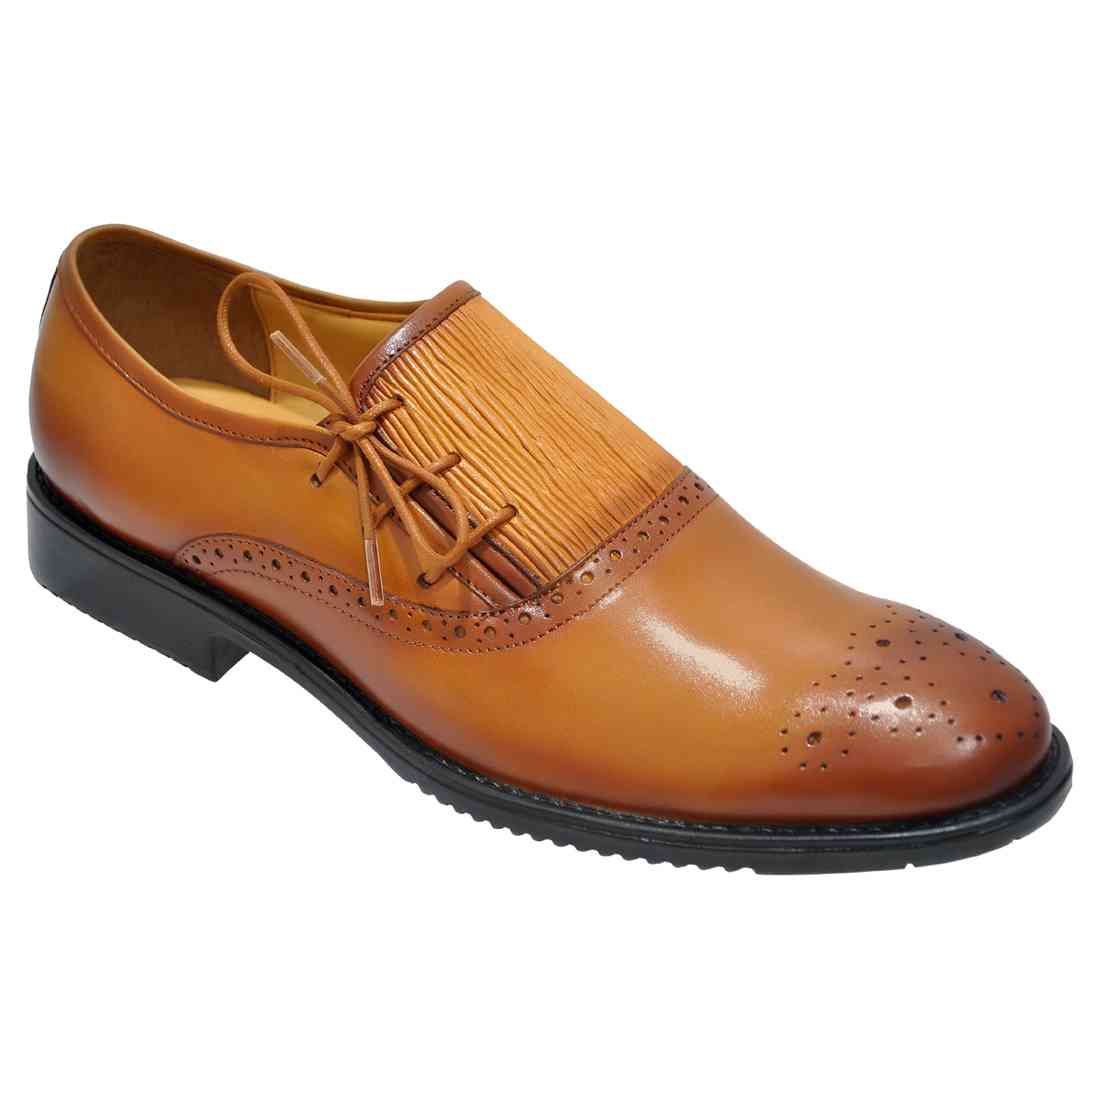 OHM New York Three Punched Laced Brogue Tip Scrumbled Leather Shoes